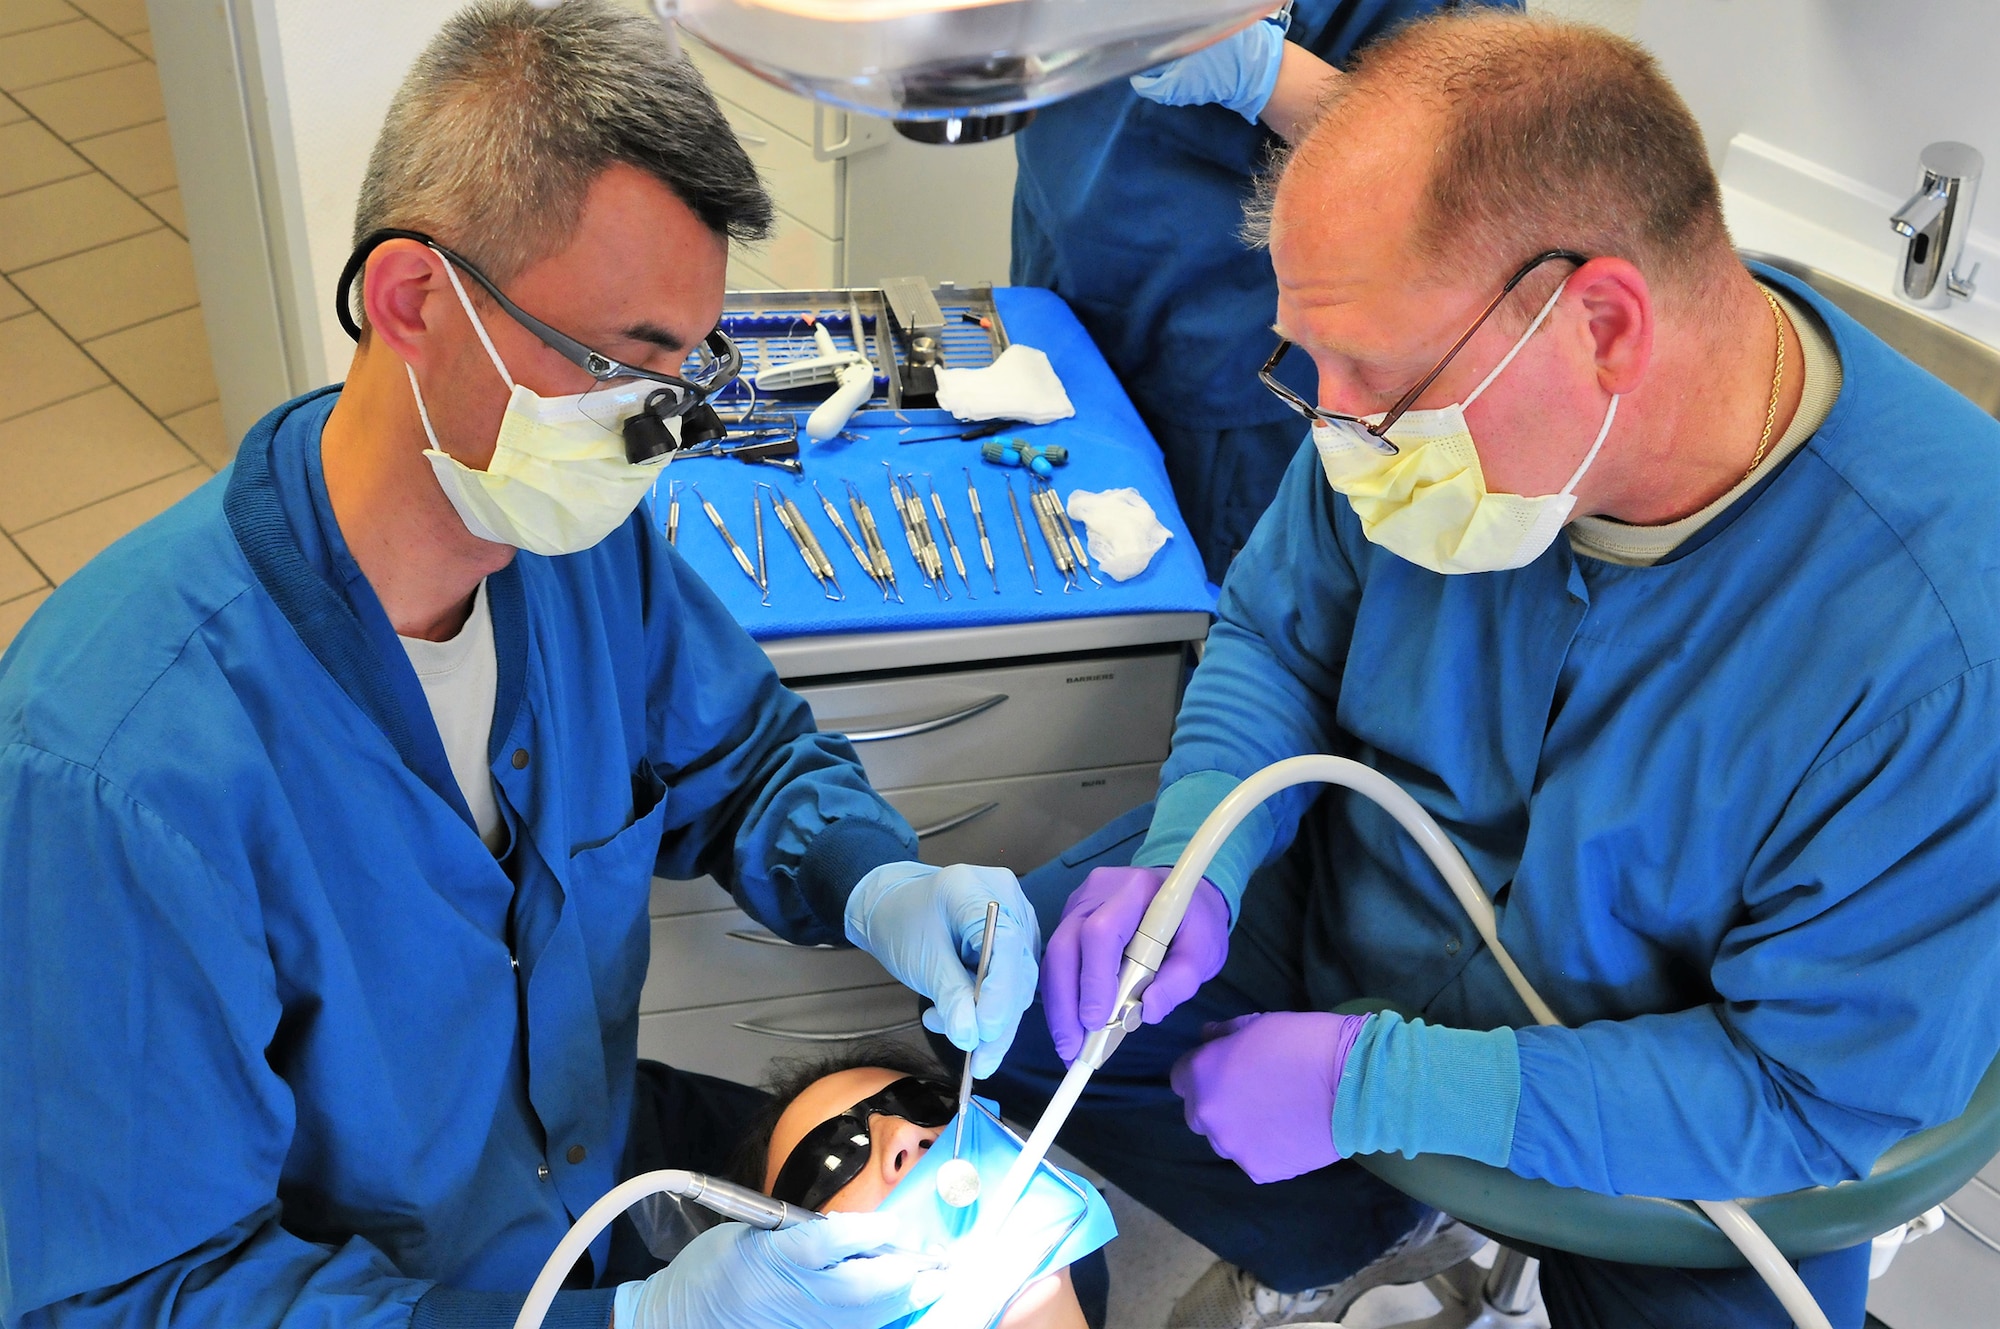 Lt. Col. Simon Nguyen, a dentist with the 178th Wing, and Tech. Sgt. Darryl Chaplin, a dental assistant with the 178th Wing, fill cavities at Ramstein Air Base in Germany, July 18, 2016. Several members of the Ohio Air National Guard temporarily deployed to Ramstein Air Base to provide assistance and to receive training in medical, communications and logistics squadrons. (Ohio Air National Guard photo by Airman 1st Class Rachel Simones)